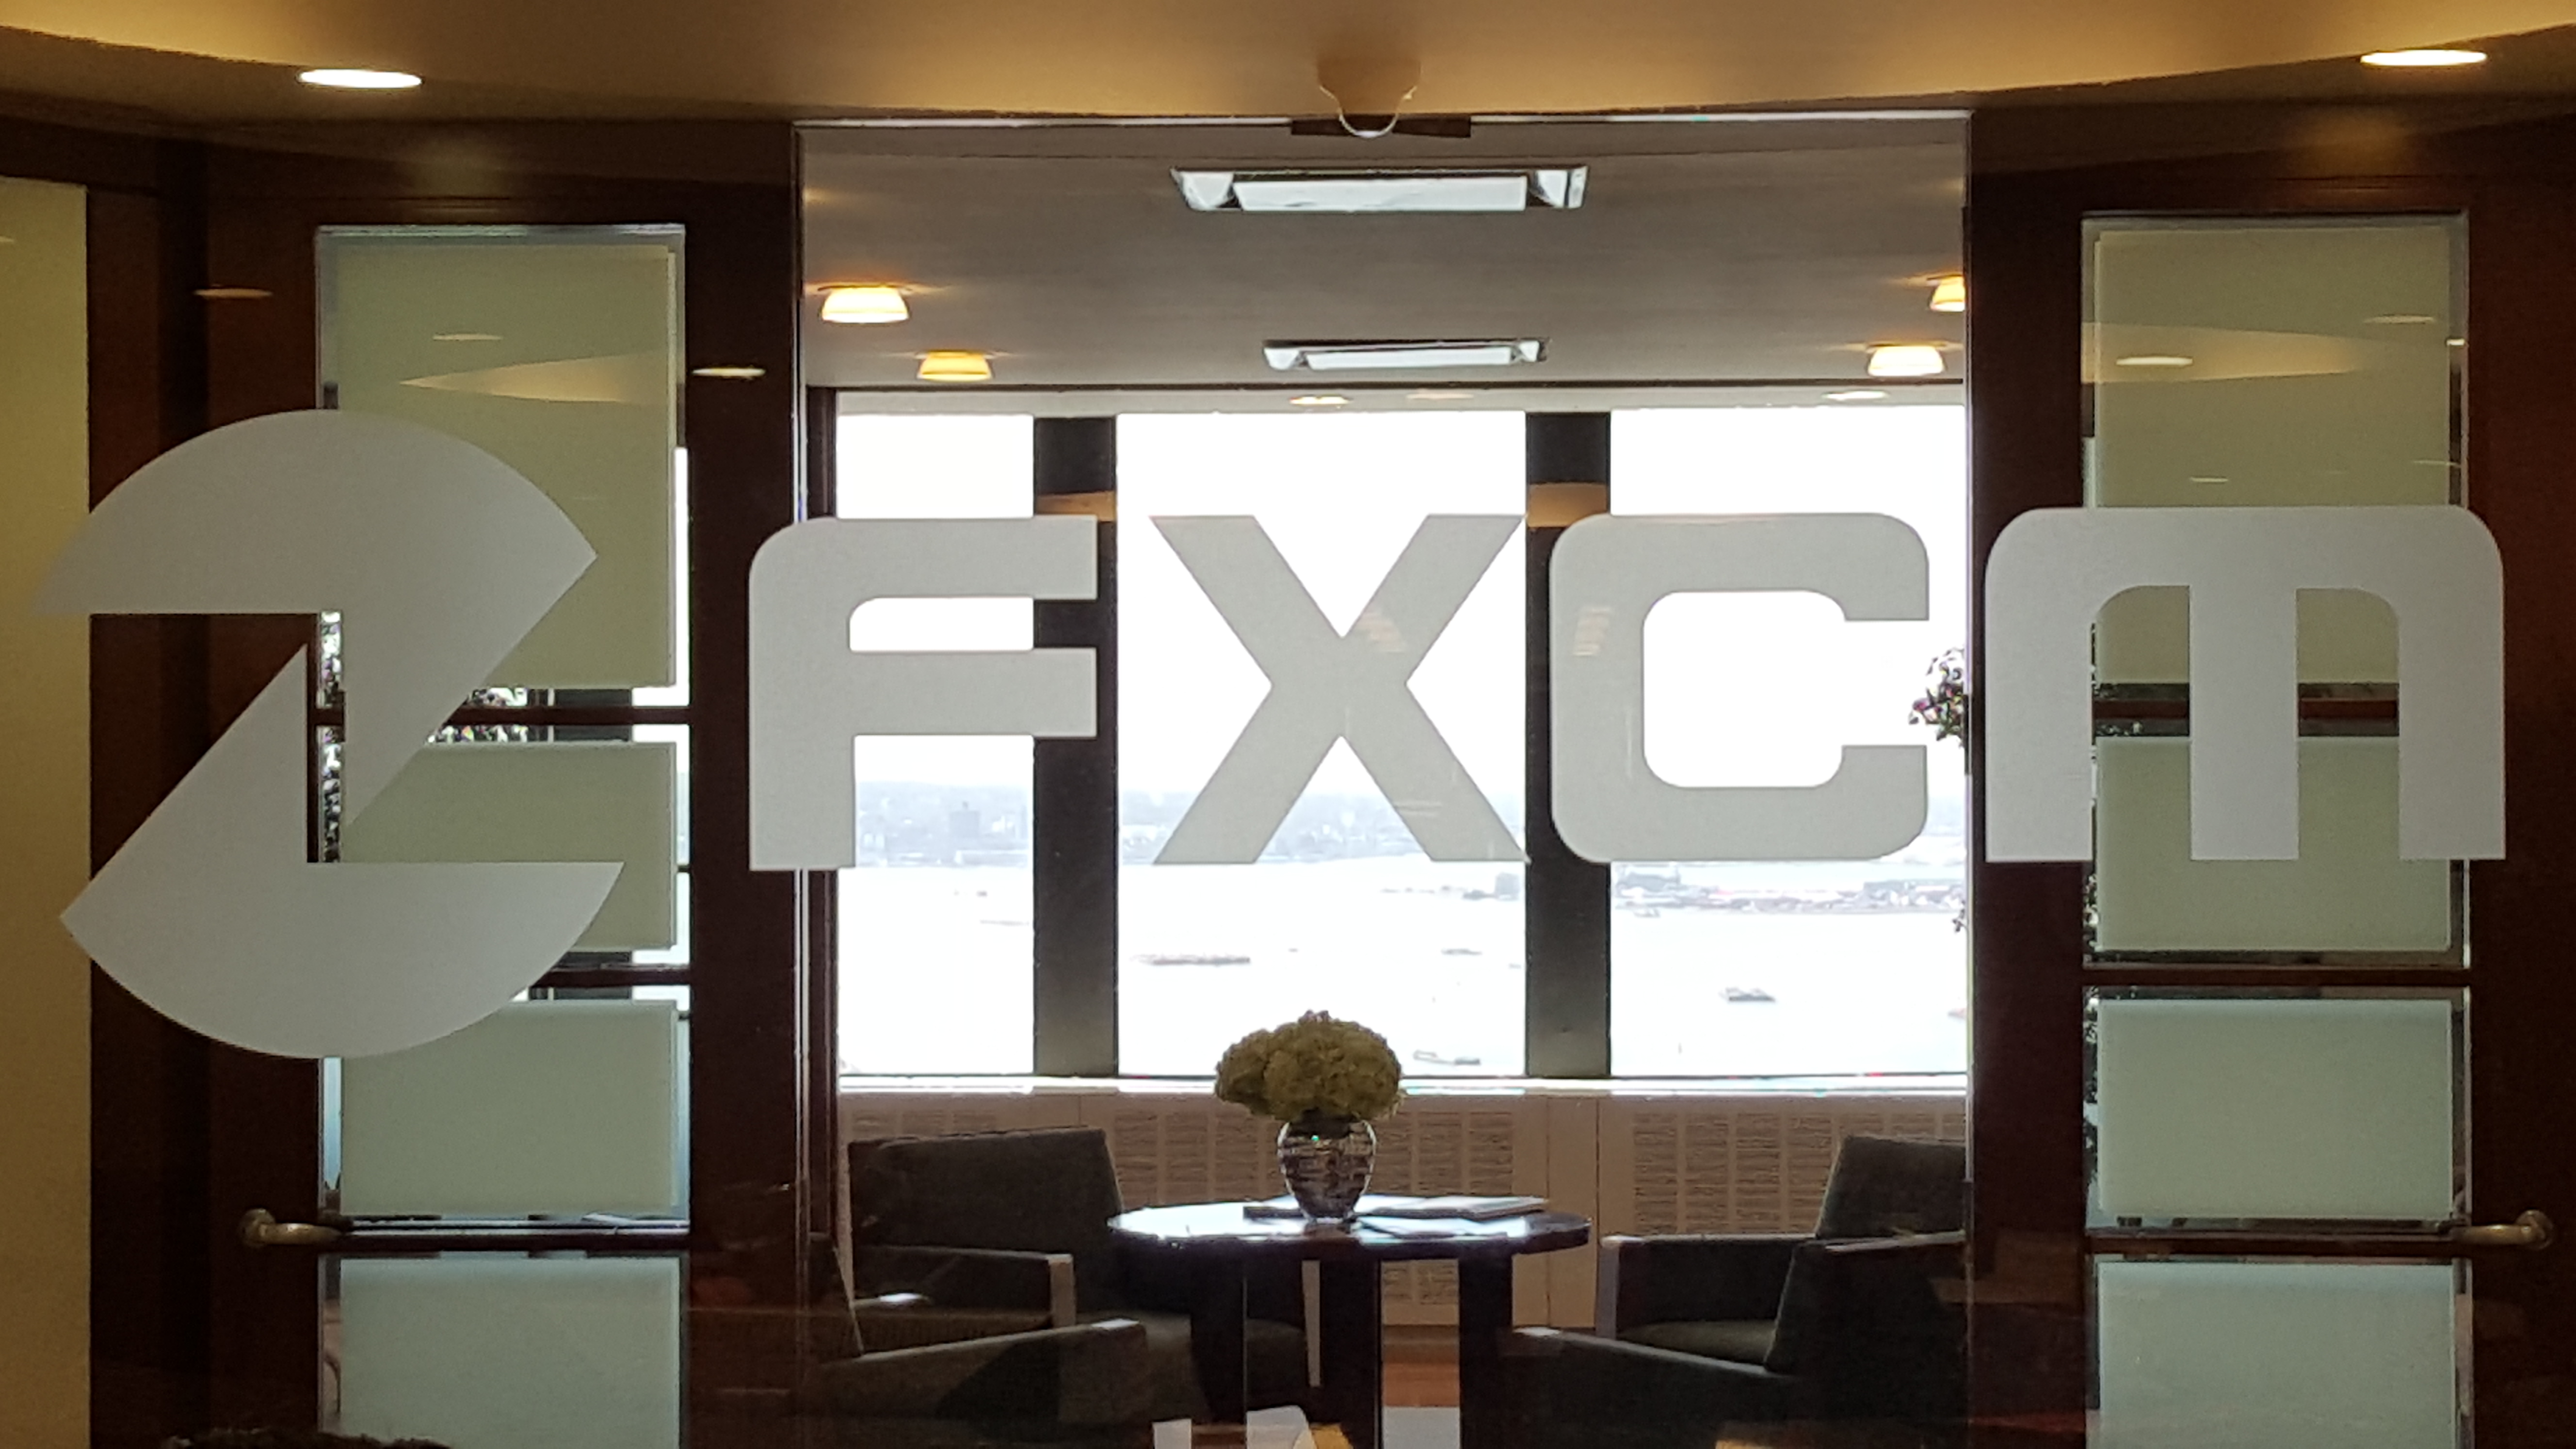 FXCM Aiming to Raise New Capital Via $15M Share Offering